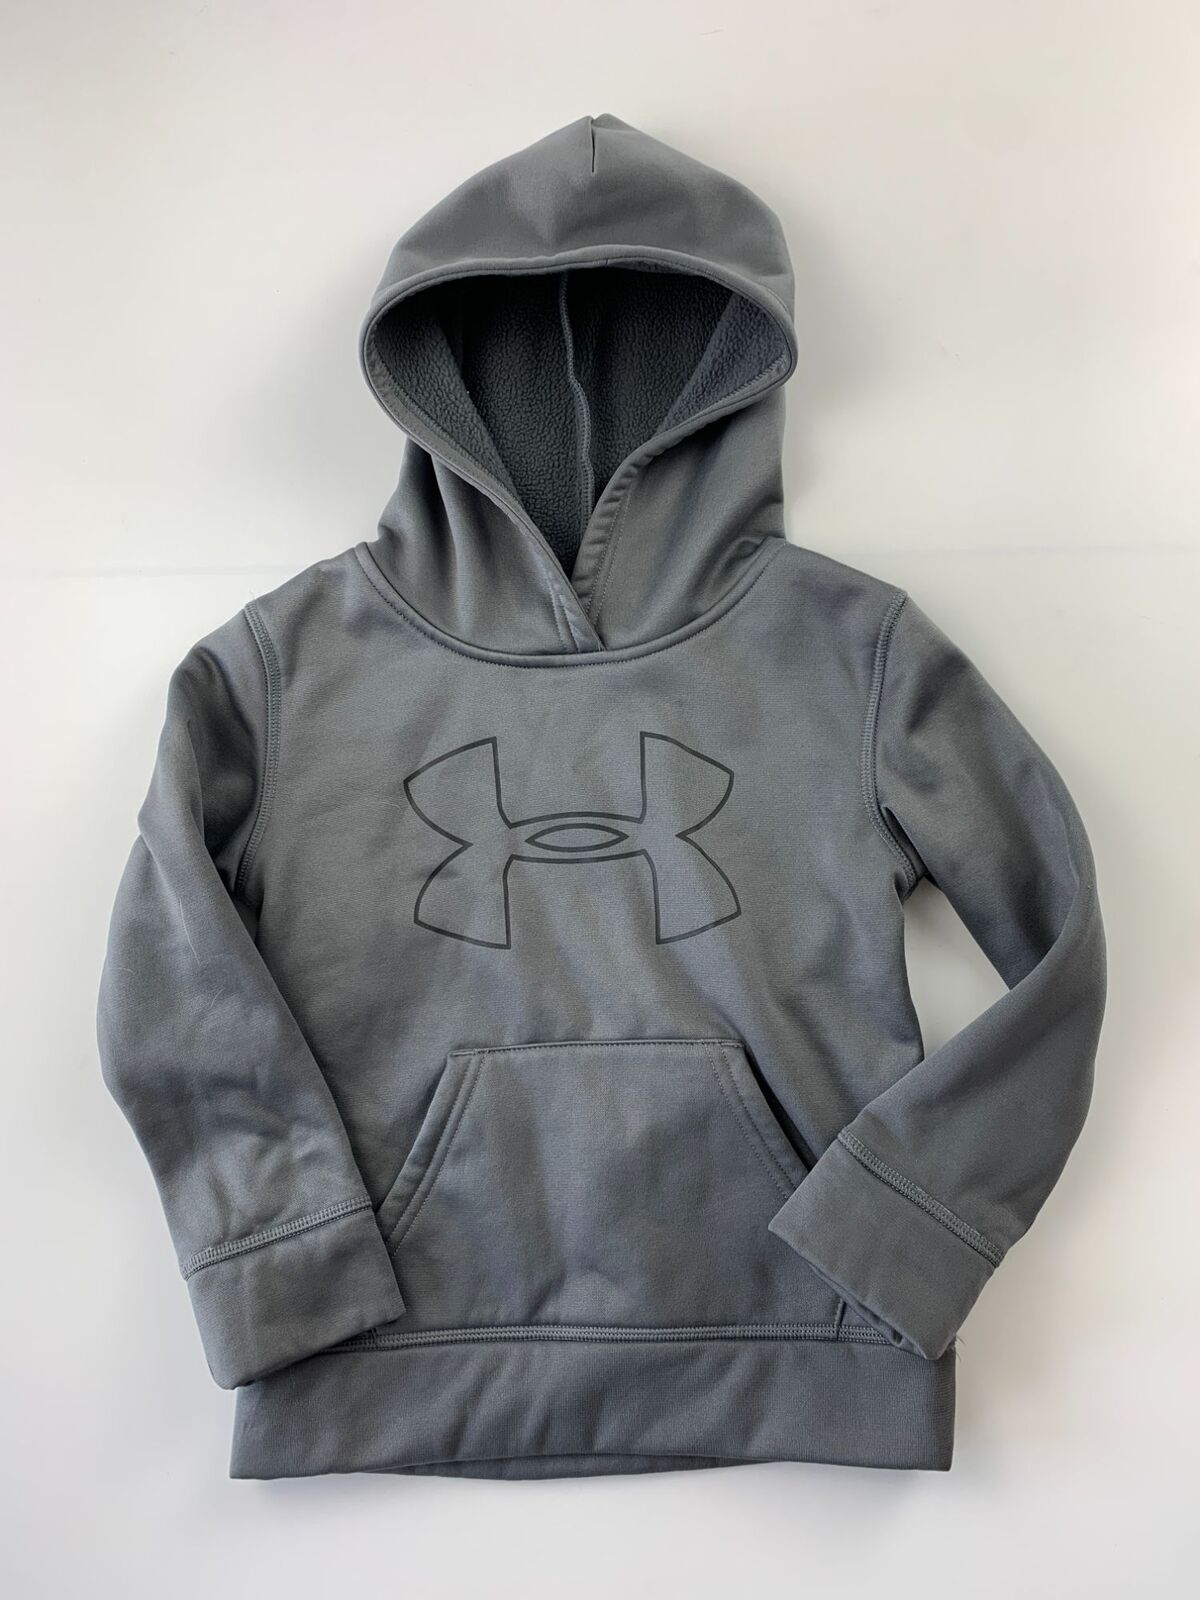 Under Armour Youth 4 Grey Hoodie